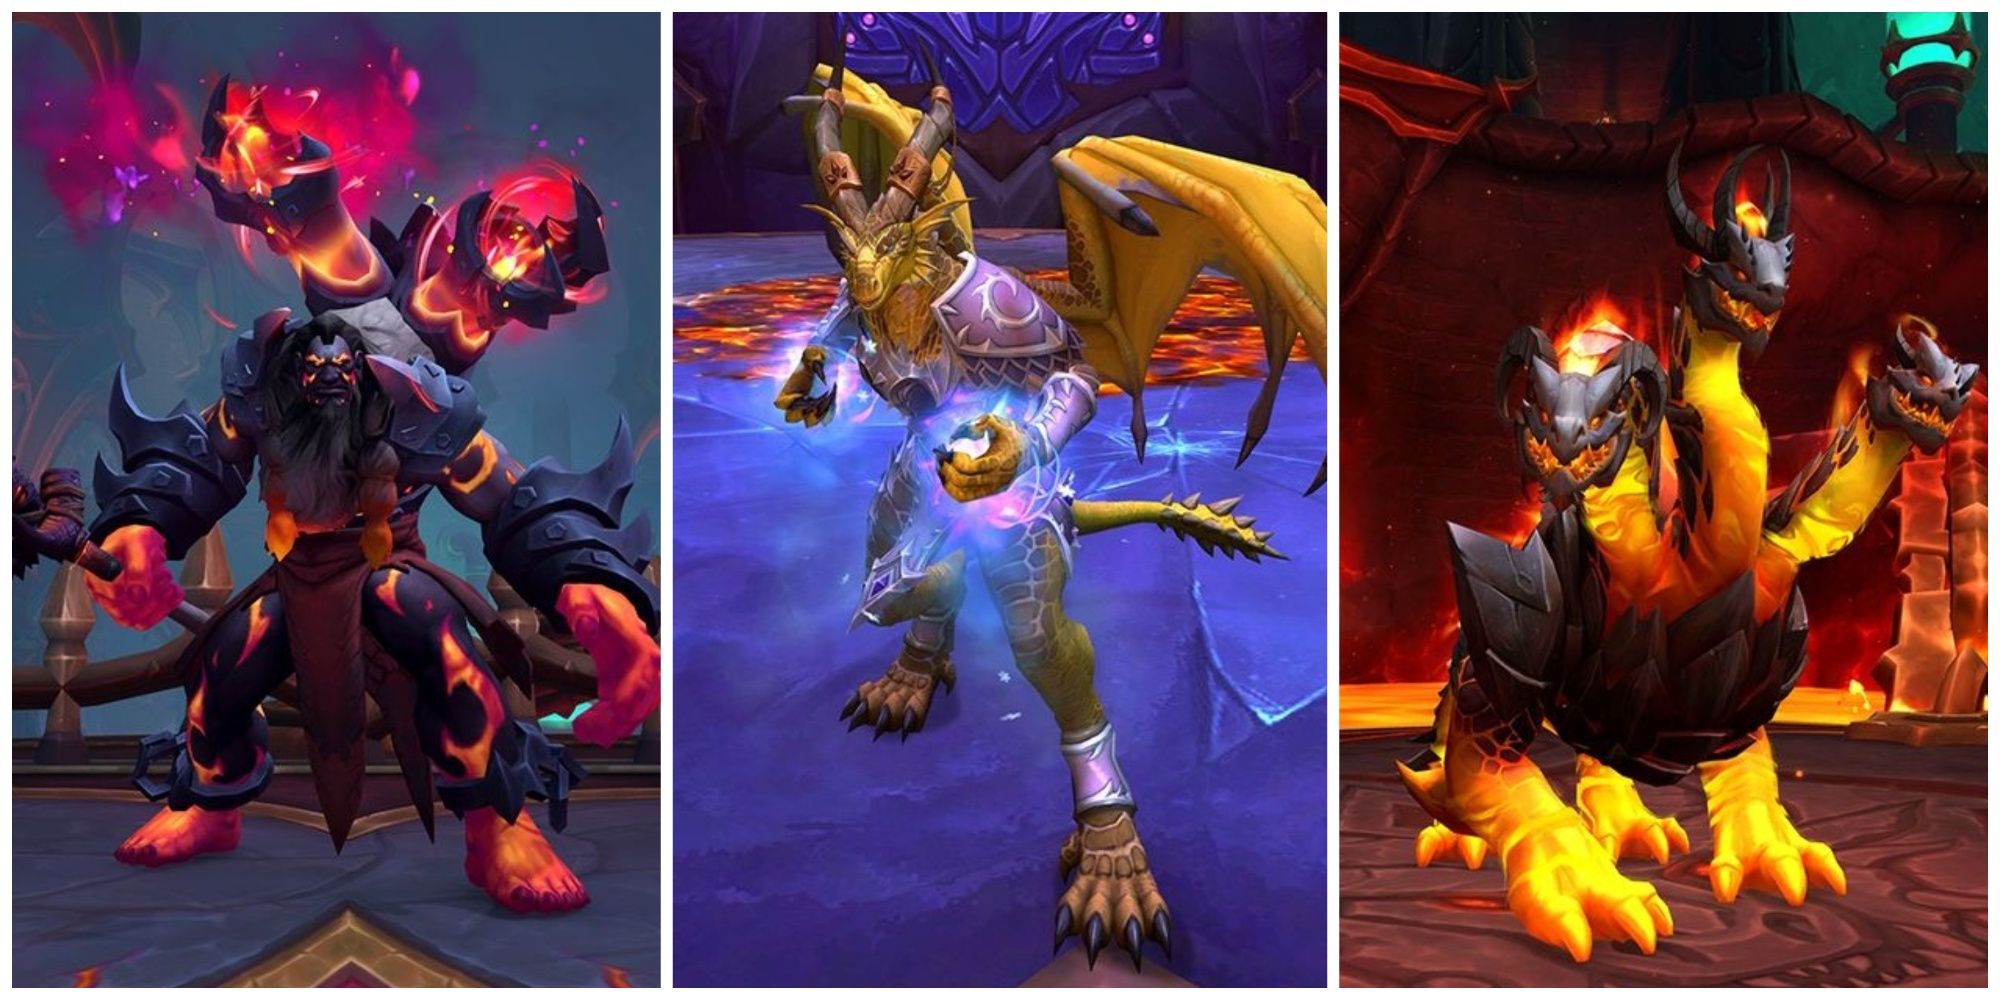 World Of Warcraft: Dragonflight split image three bosses from Aberrus in their arenas